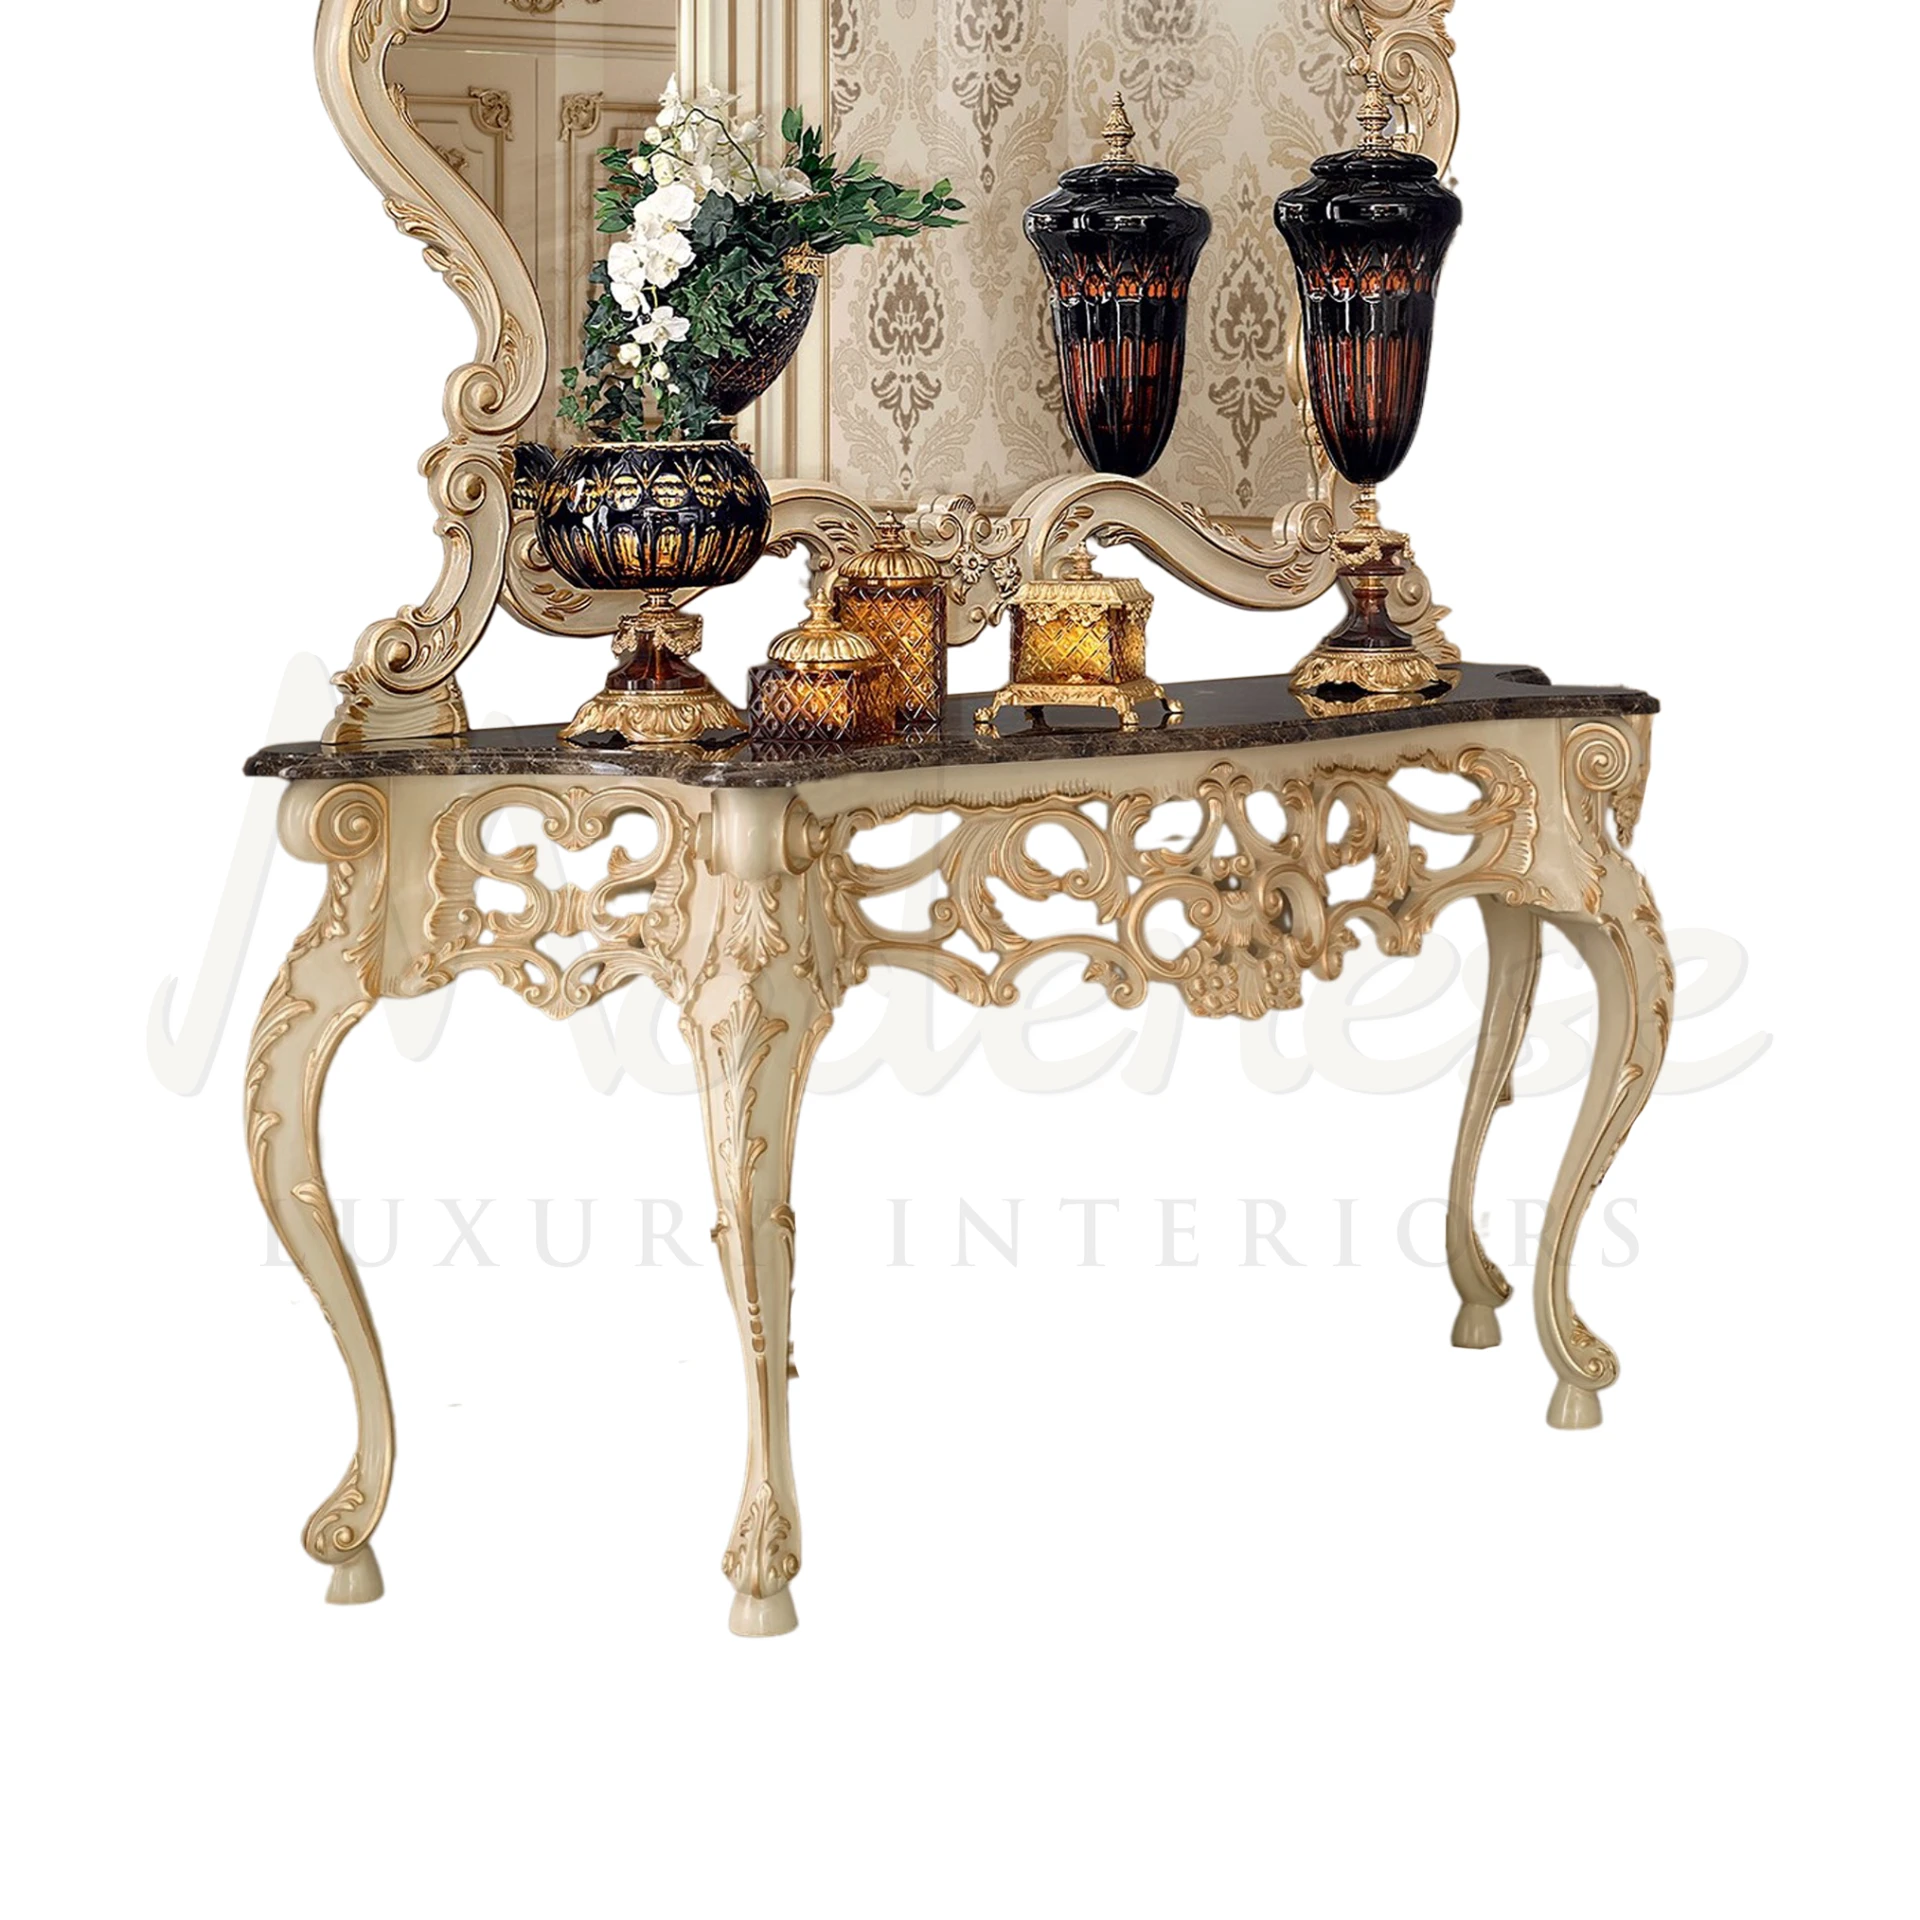 Elegant Refined Gold Leaf Console with Baroque structure, showcasing exquisite Italian carvings on classic bent legs.